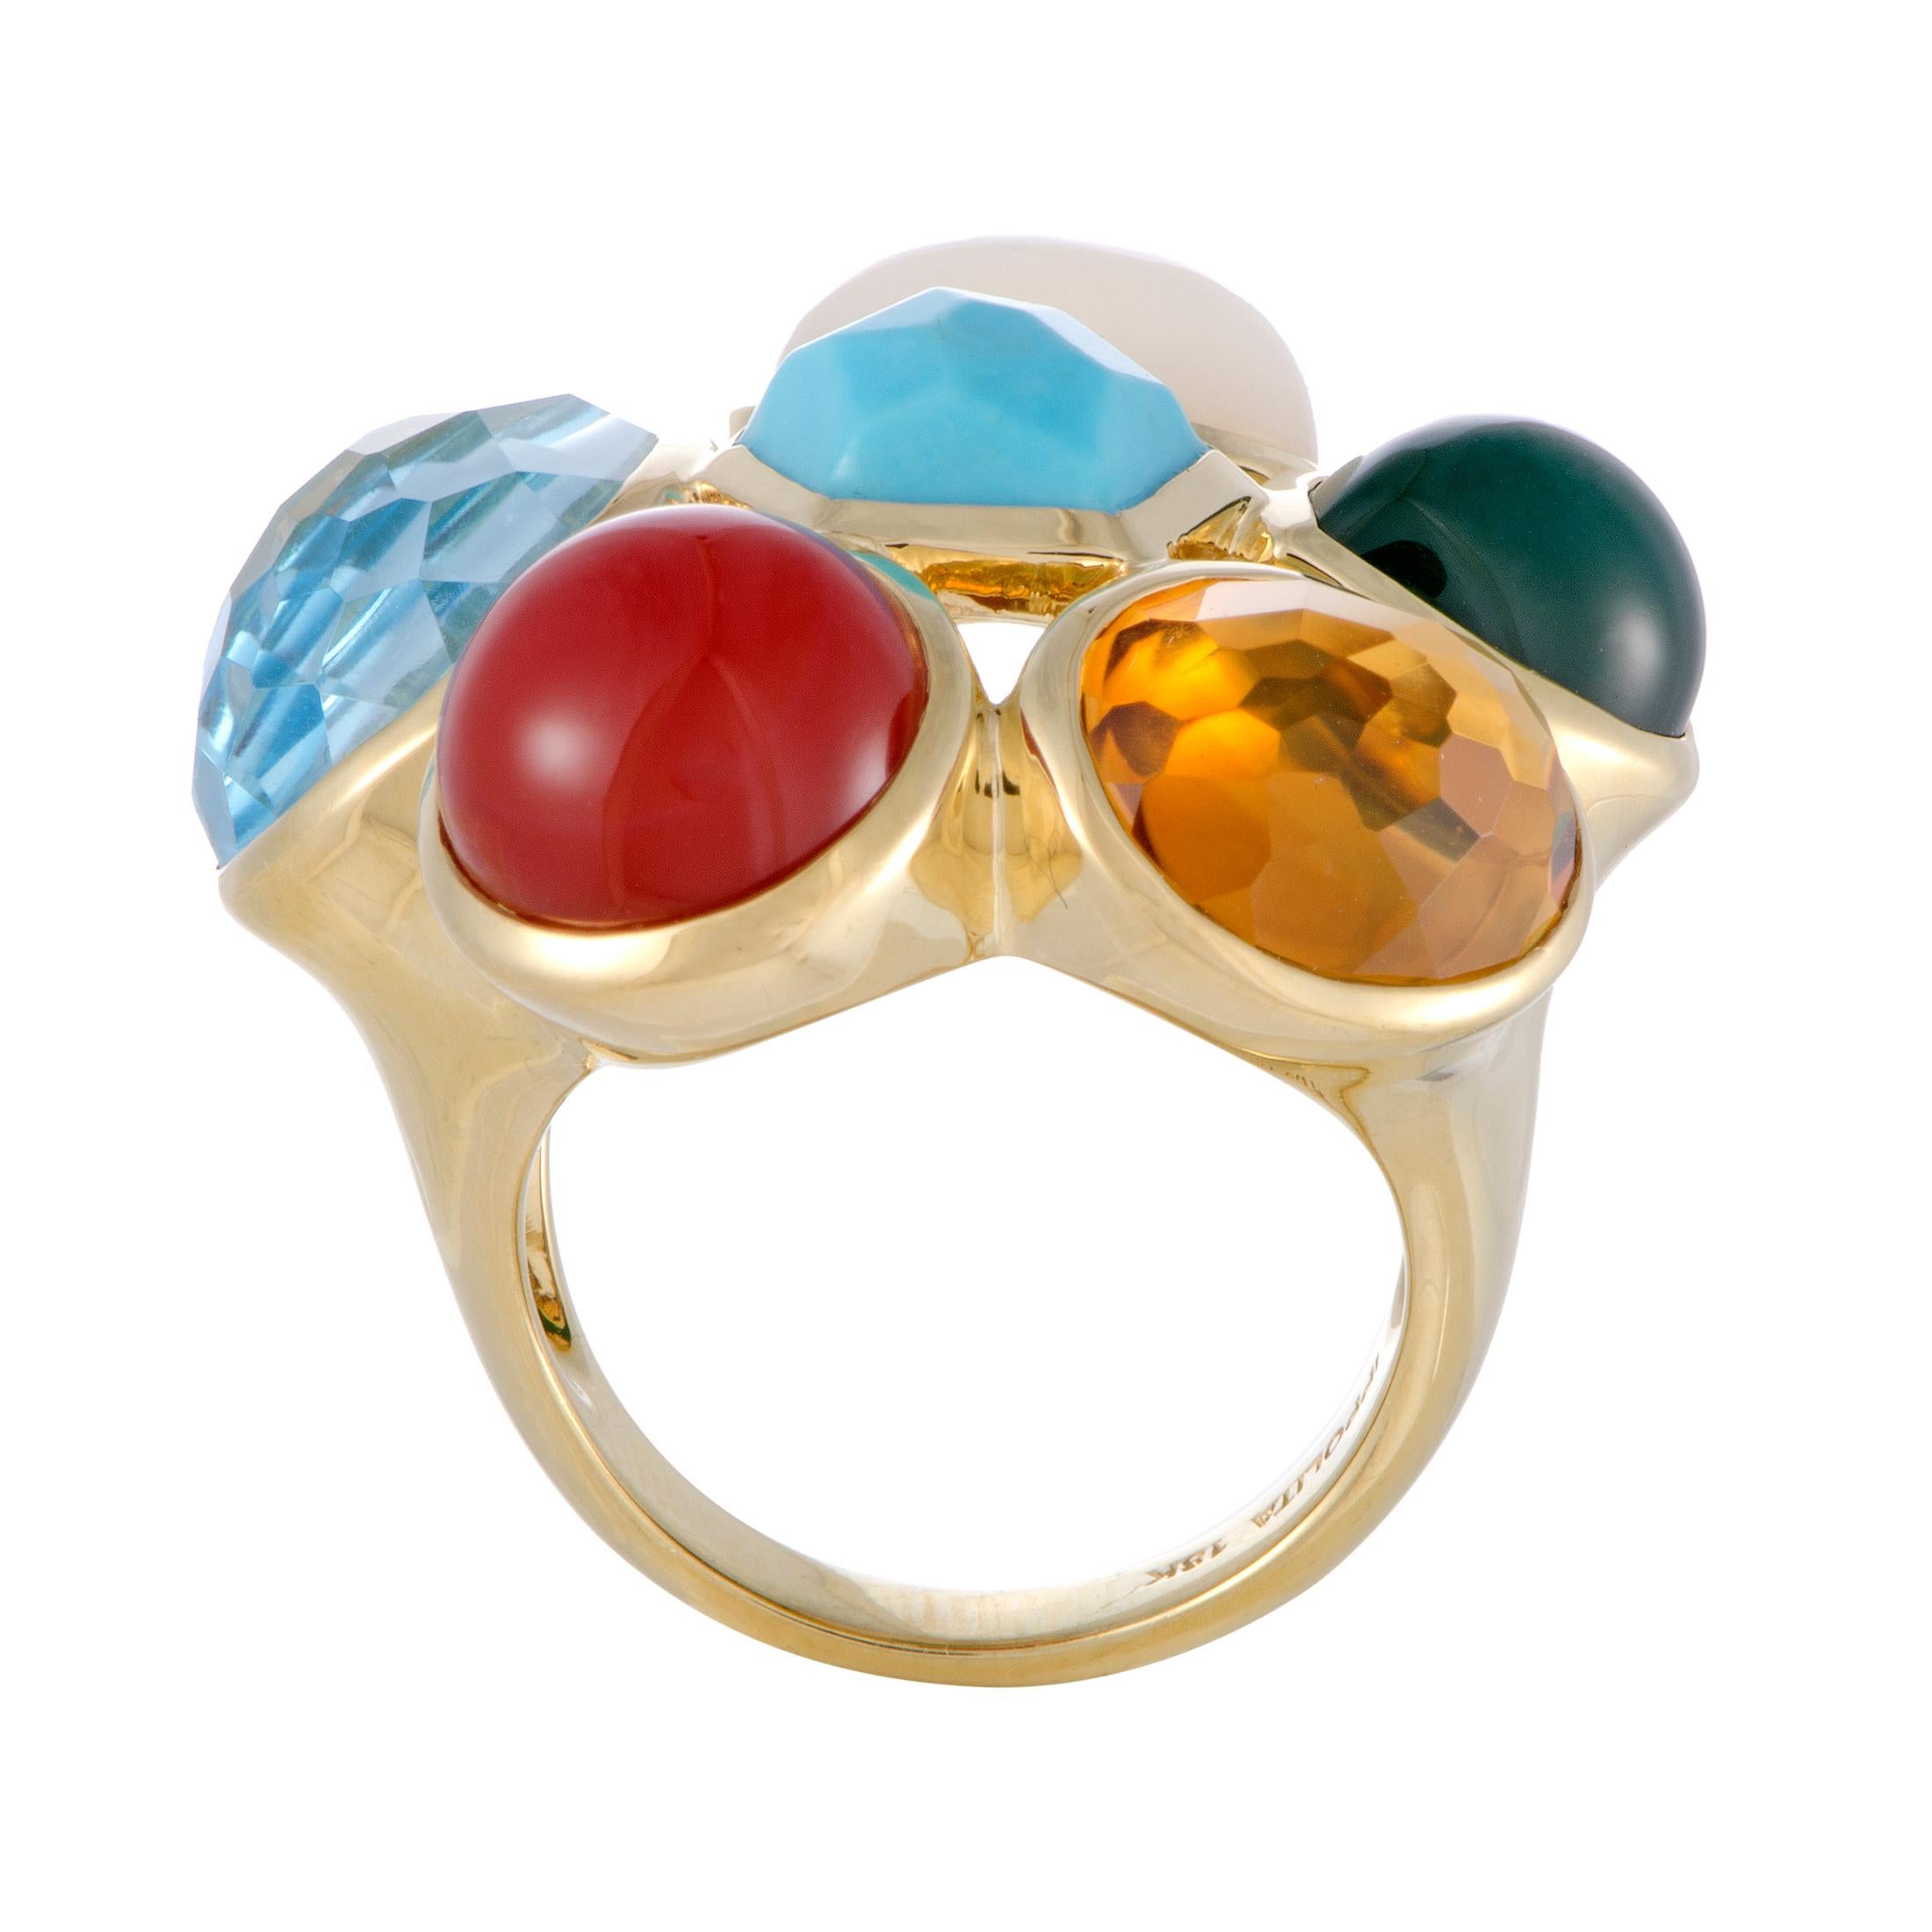 Featuring six diversely cut gems in attractive colors that are set onto an exceptionally crafted 18K yellow gold body, this marvelous ring from Ippolita’s “Rock Candy”  collection offers eye-catching fashionable appearance.
Ring Top Dimensions: 32mm